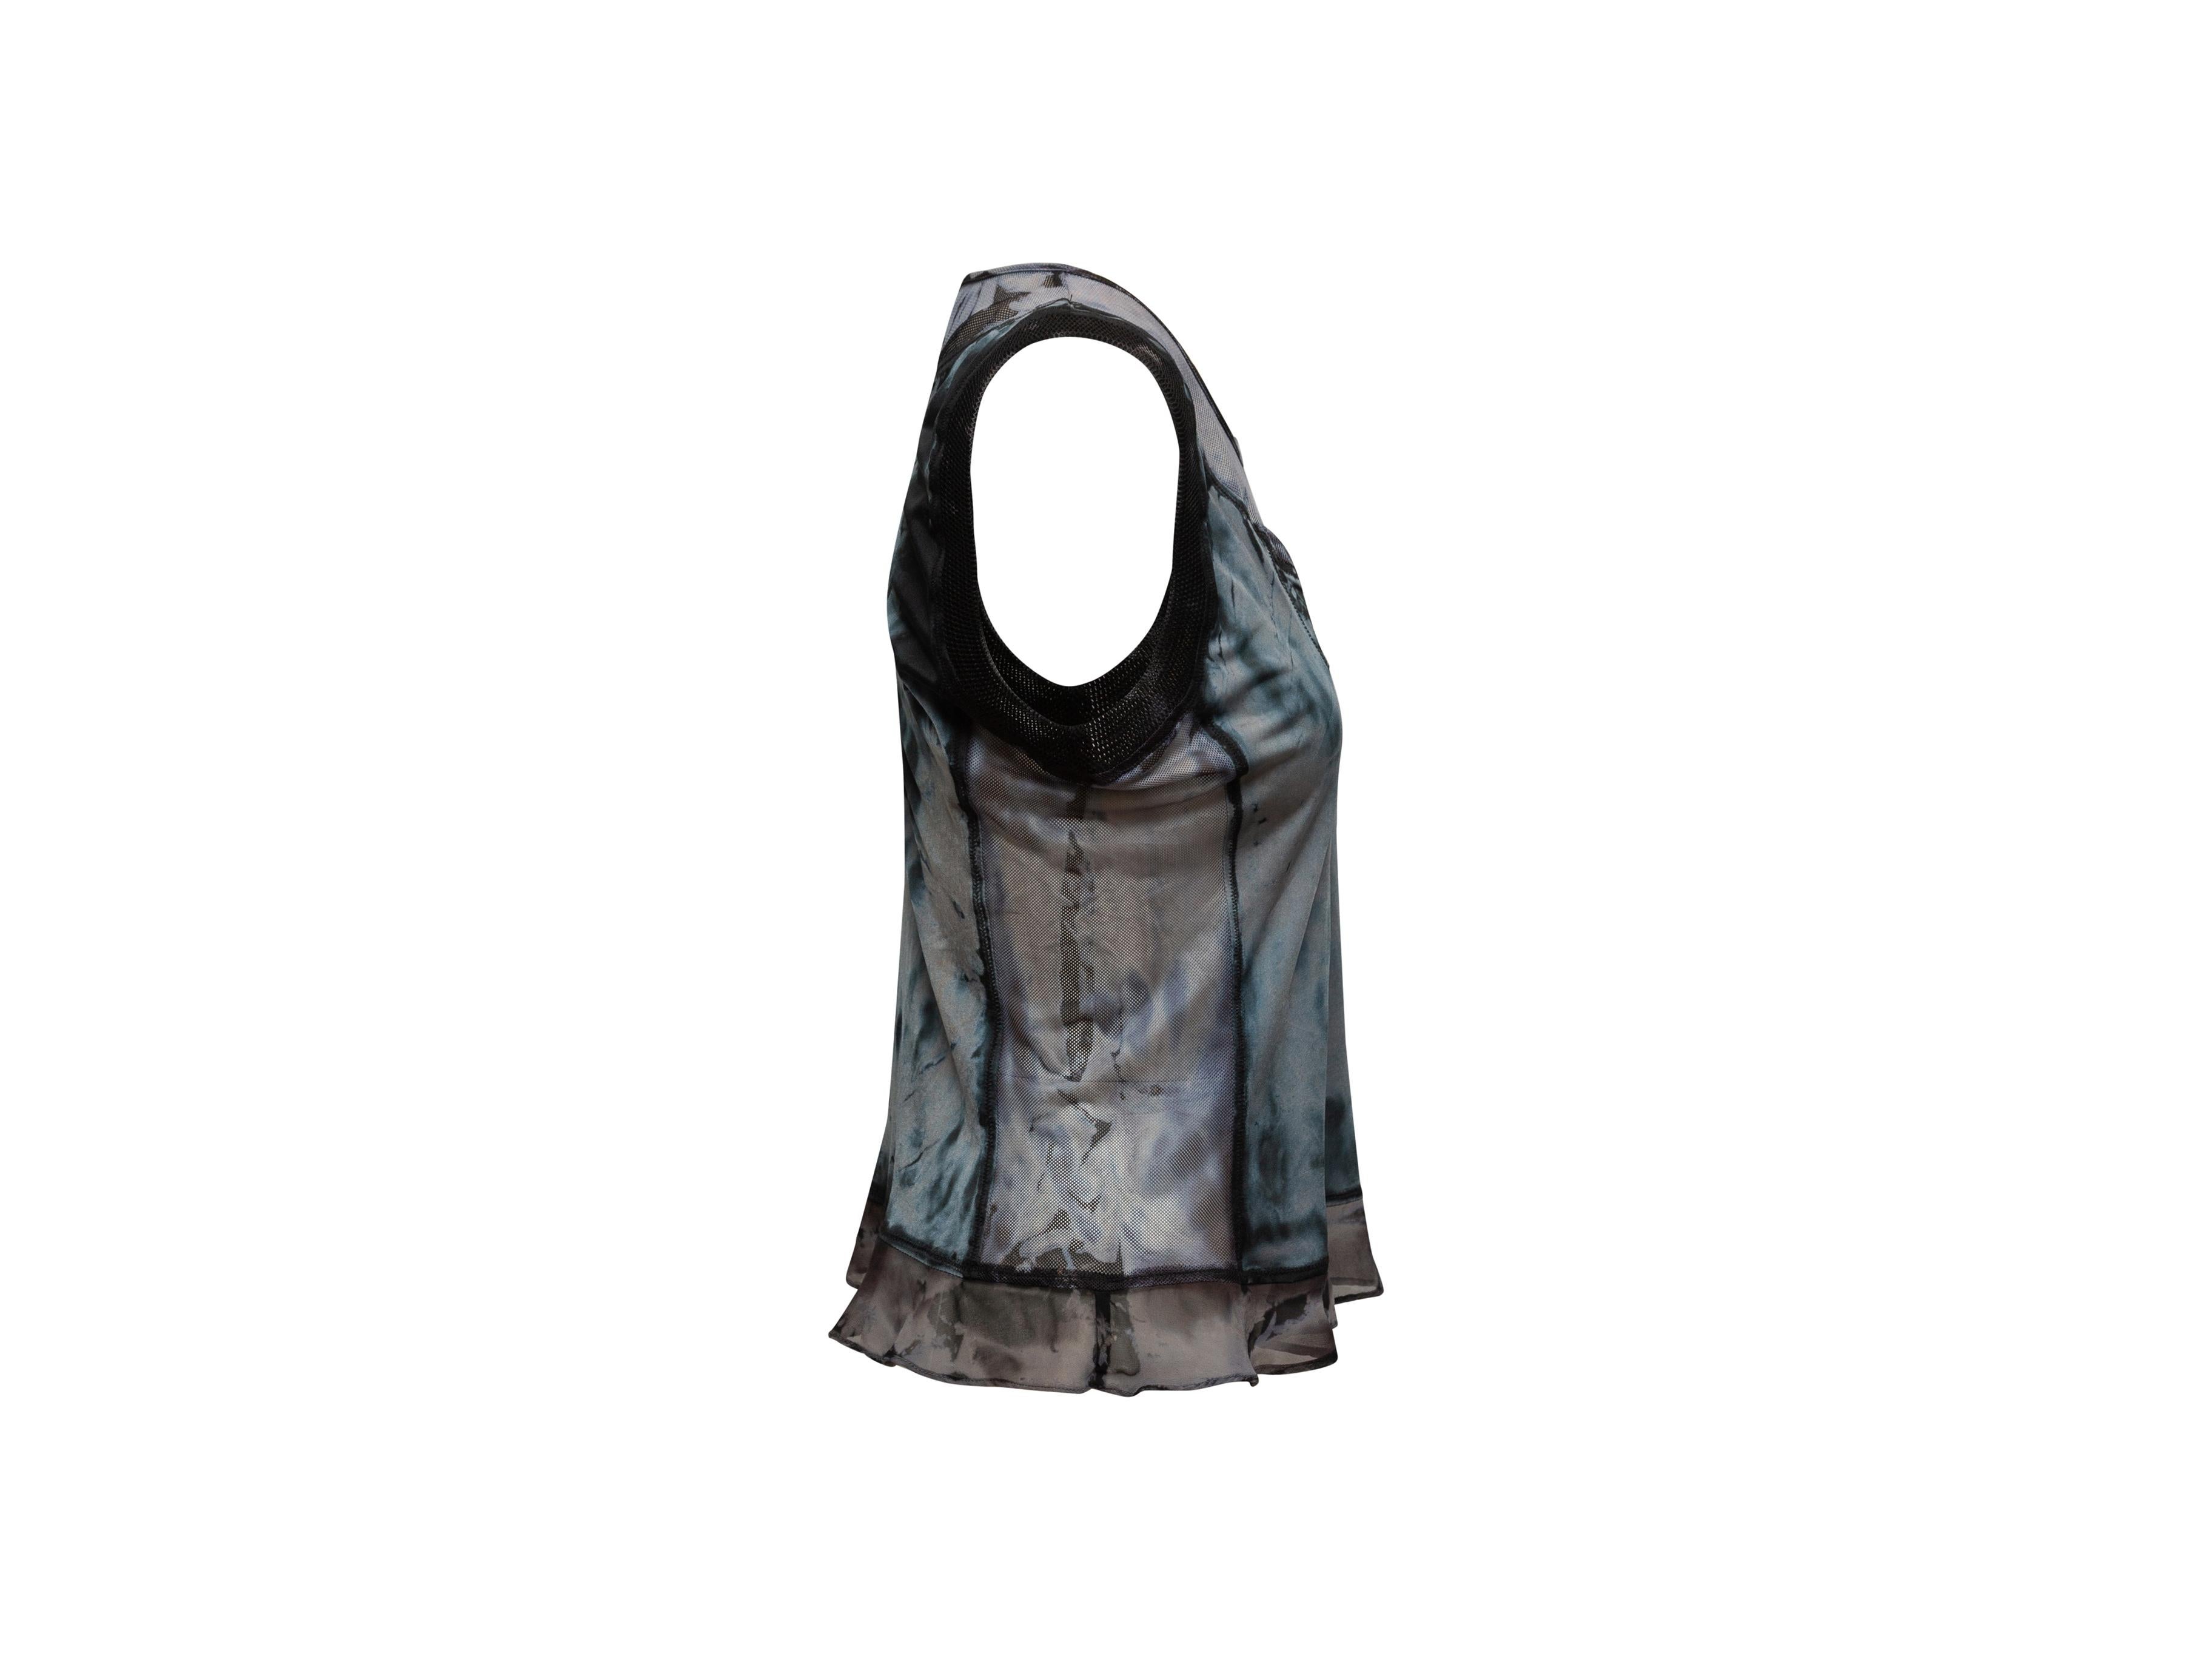 Product details: Grey, blue and black tie-dye sleeveless top by Yoshiki Hishinuma. Crew neck. Graphic number printed at front. 36